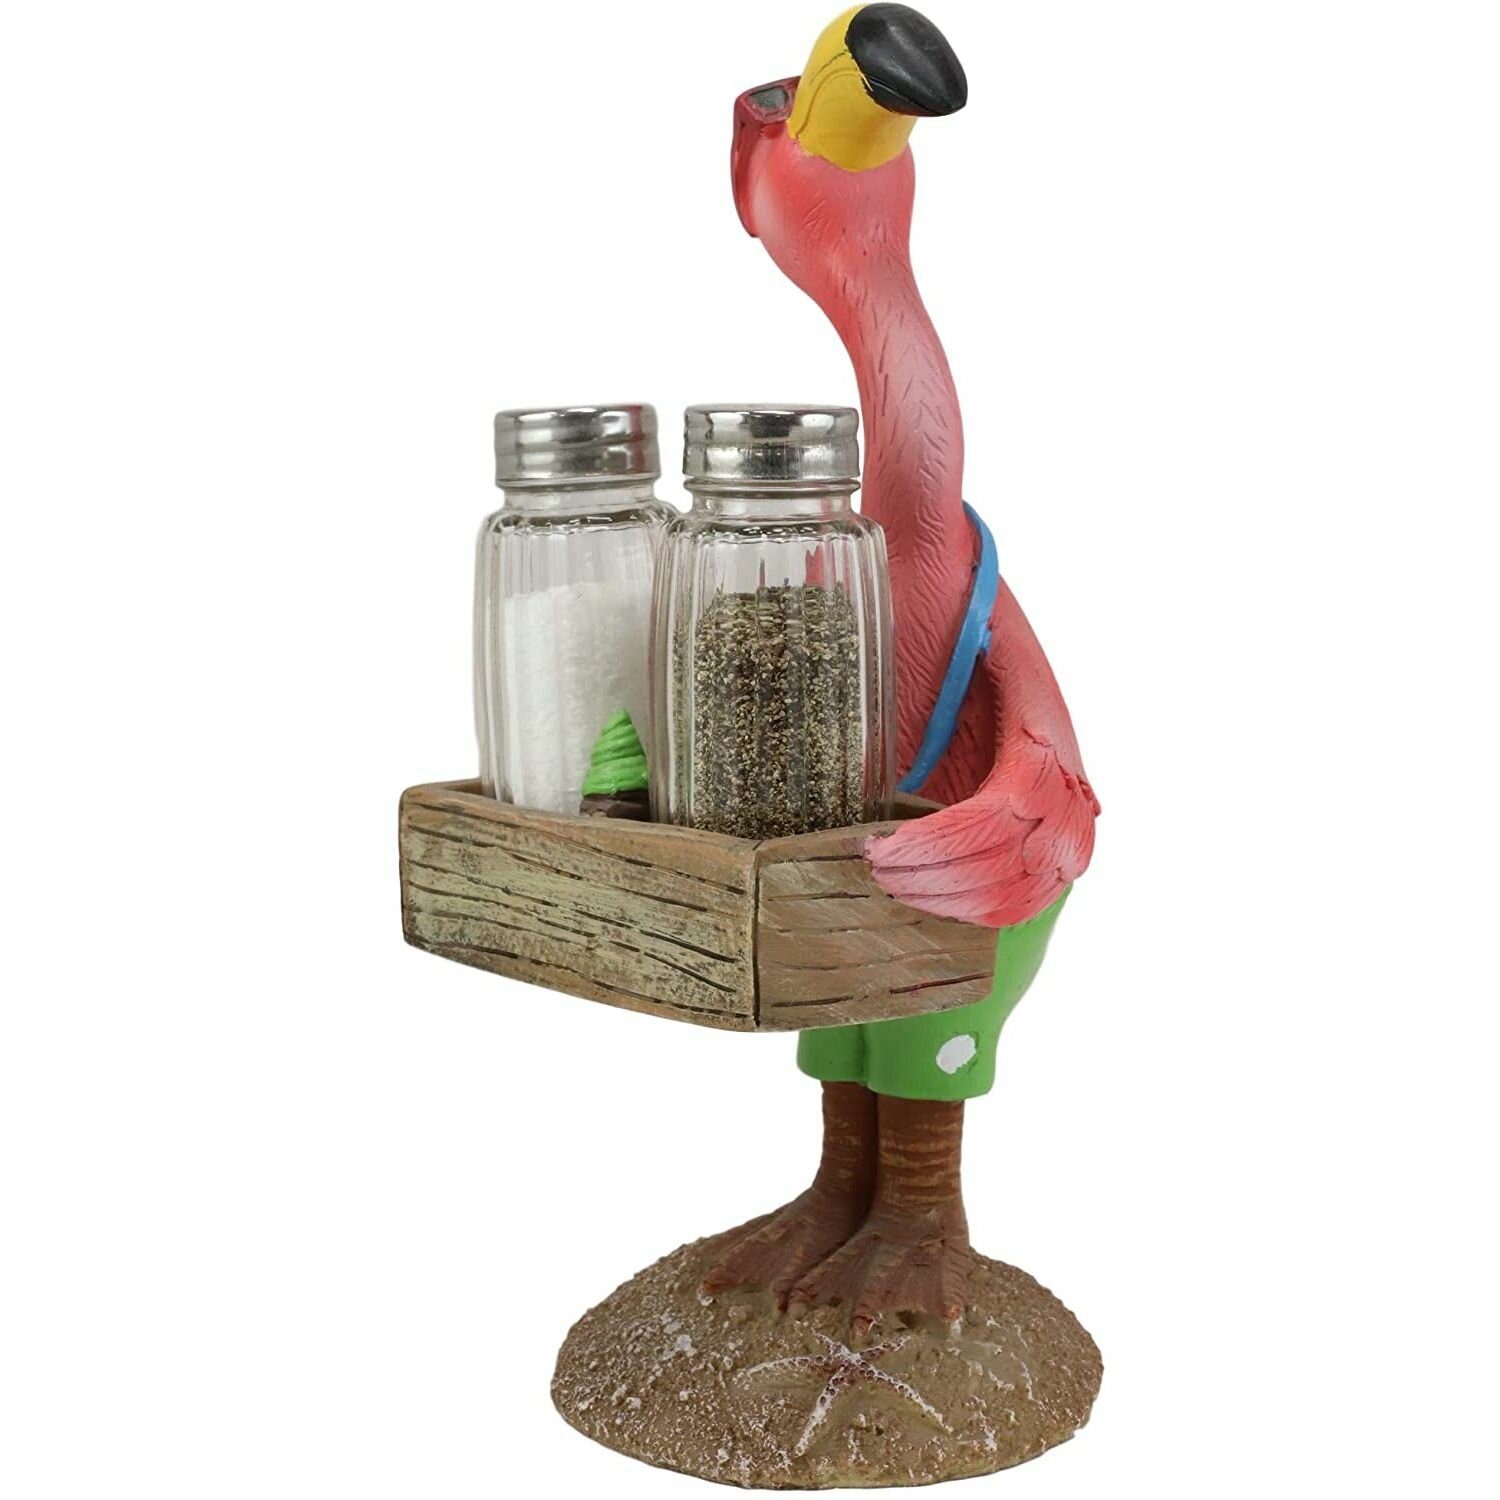 Ebros Tropical Paradise Bird Pink Butler Flamingo With Cool Shades And Spice Basket Display Holder Statue With Glass Salt And Pepper Shakers Set Wild Birds Decor Figurine Kitchen Dining Centerpiece